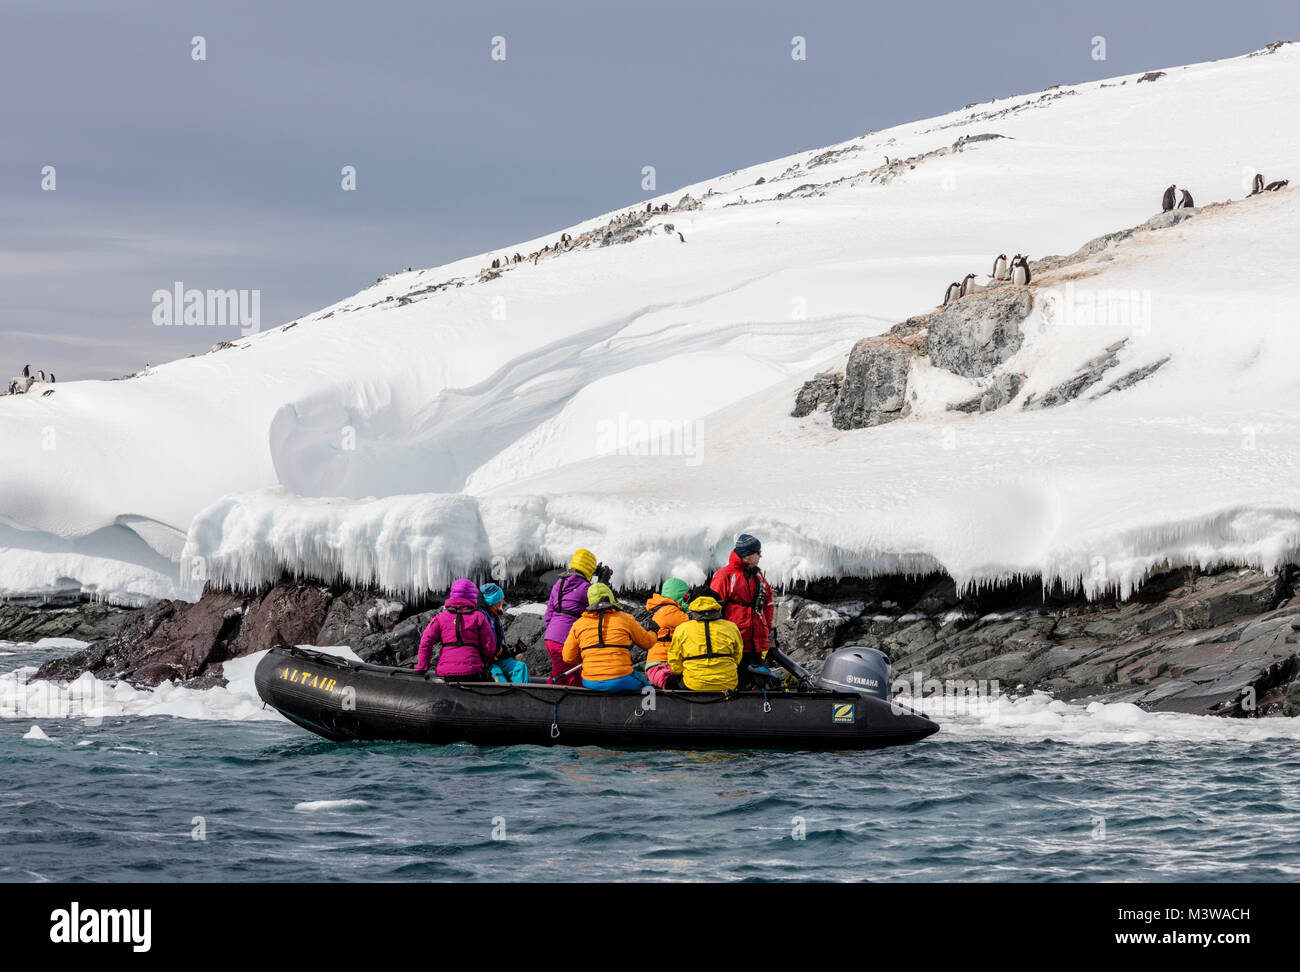 Large inflatable Zodiac boats shuttle alpine mountaineering skiers to Antarctica from the passenger ship Ocean Adventurer; Gentoo Penguins beyond Stock Photo